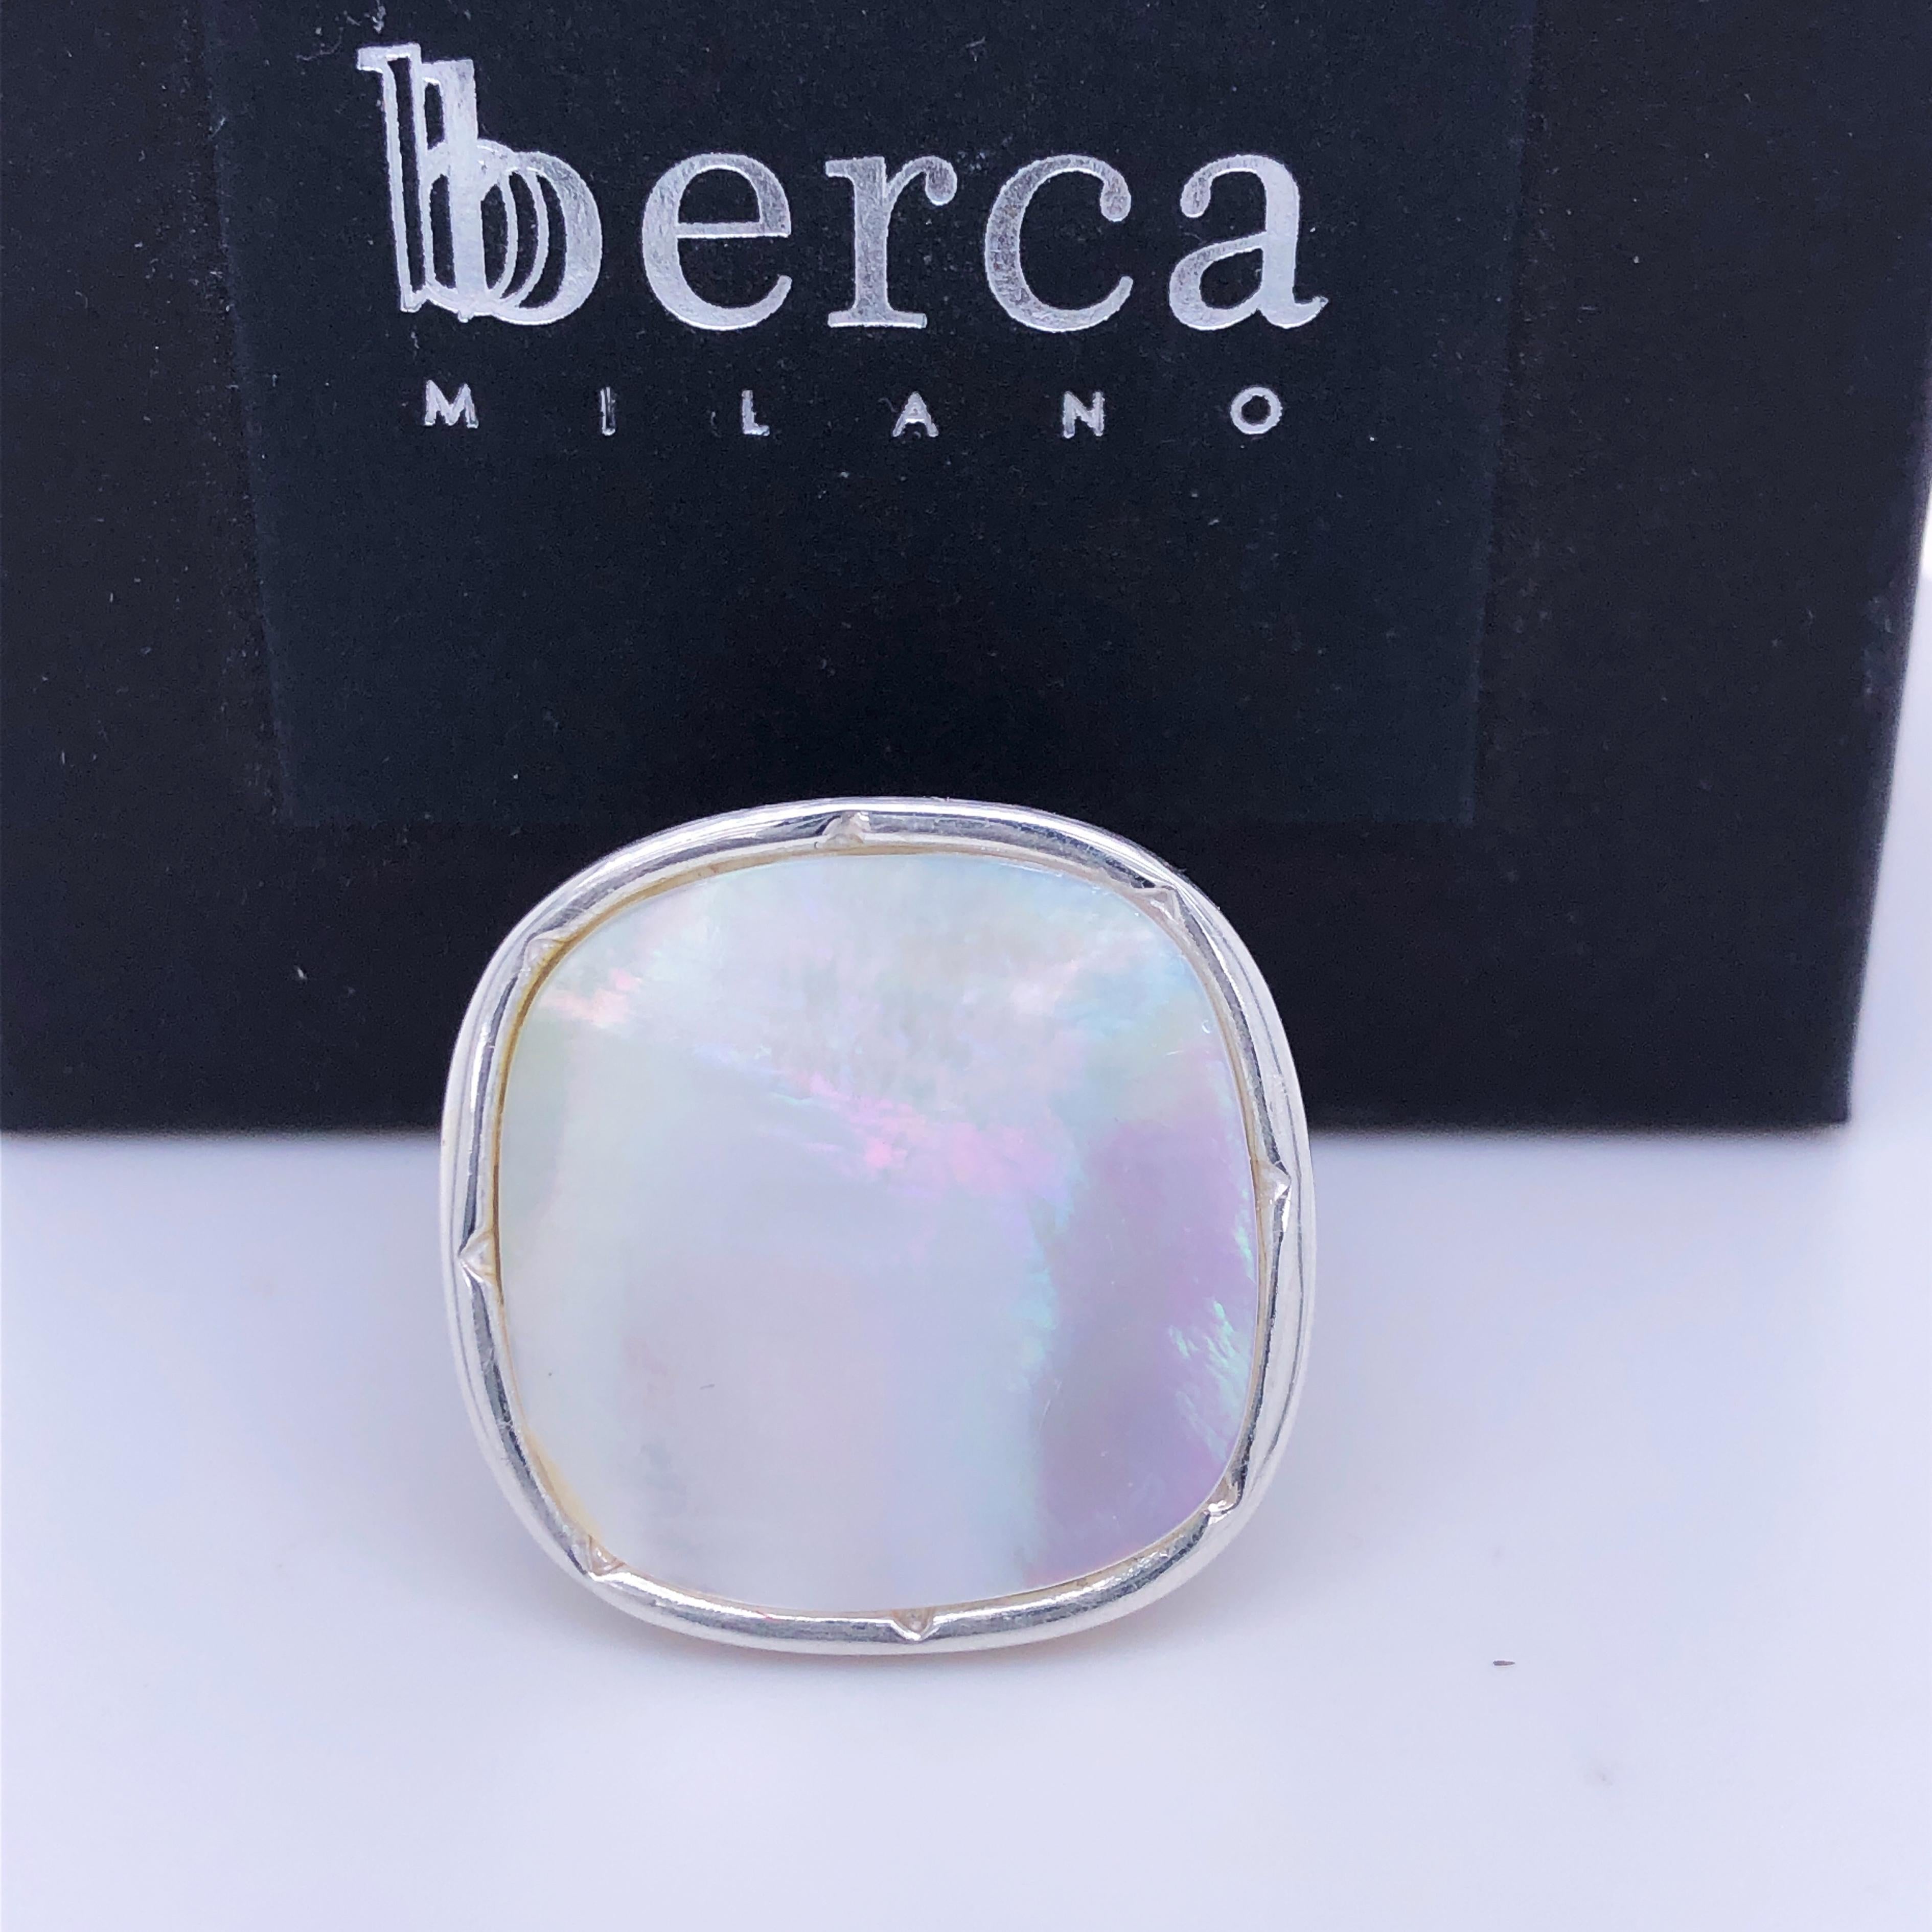 One-of-a-kind, Contemporary, Chic yet Timeless Cocktail Ring Featuring a Seven Carat Hand Inlaid Antik Cut Mother-of-pearl(0.850x0.850in) in a beautifully Handcrafted Hand Engraved Solid Sterling Silver Setting.
The color-changing of Mother-of-pearl